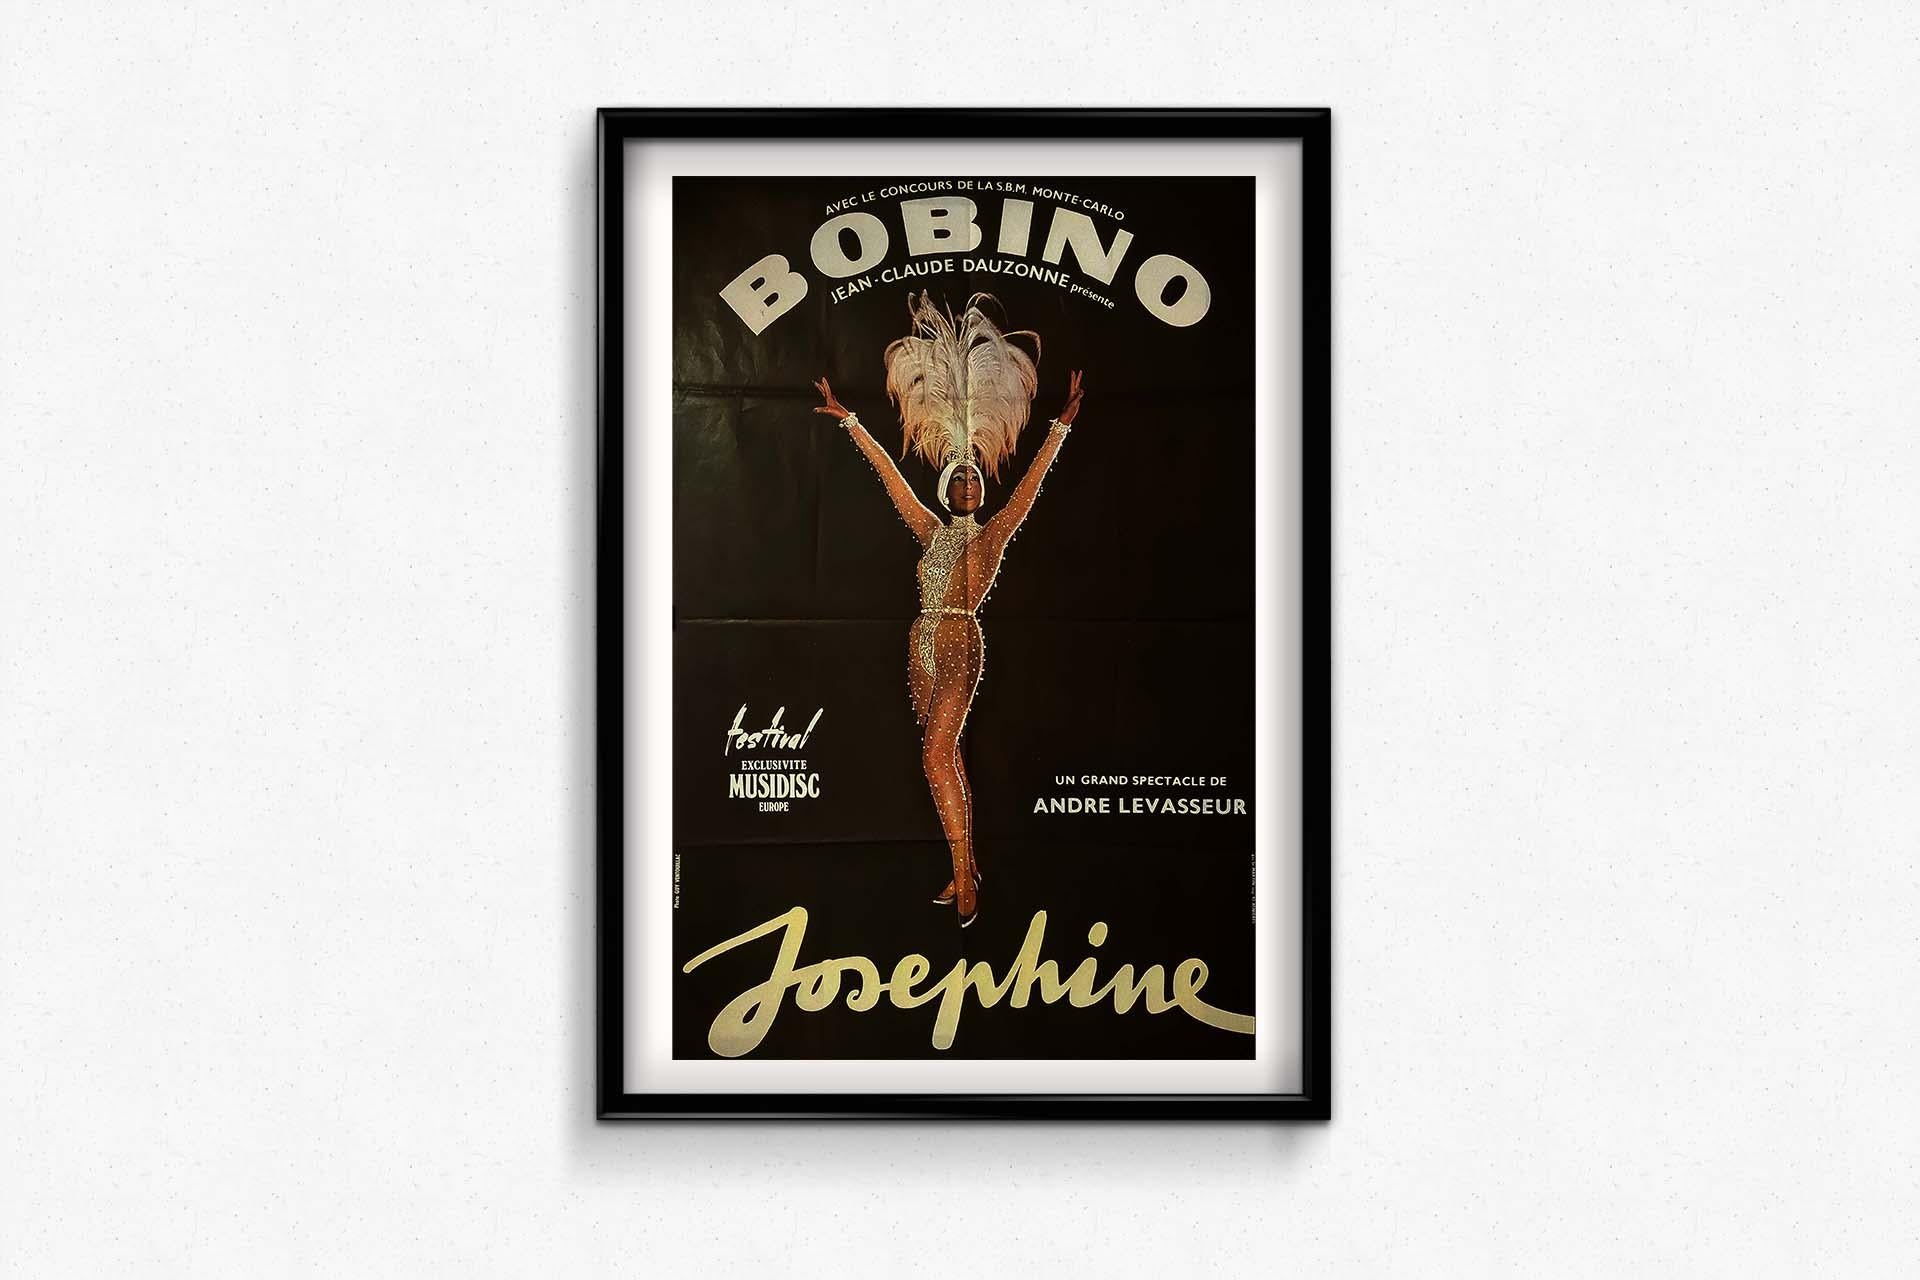 The last performance of Josephine Baker's career took place on April 8, 1975 at the age of 68. The great hall of Bobino, a Parisian music hall where she had performed regularly in the 1920s, celebrates her 50 years of career. Four days later, she